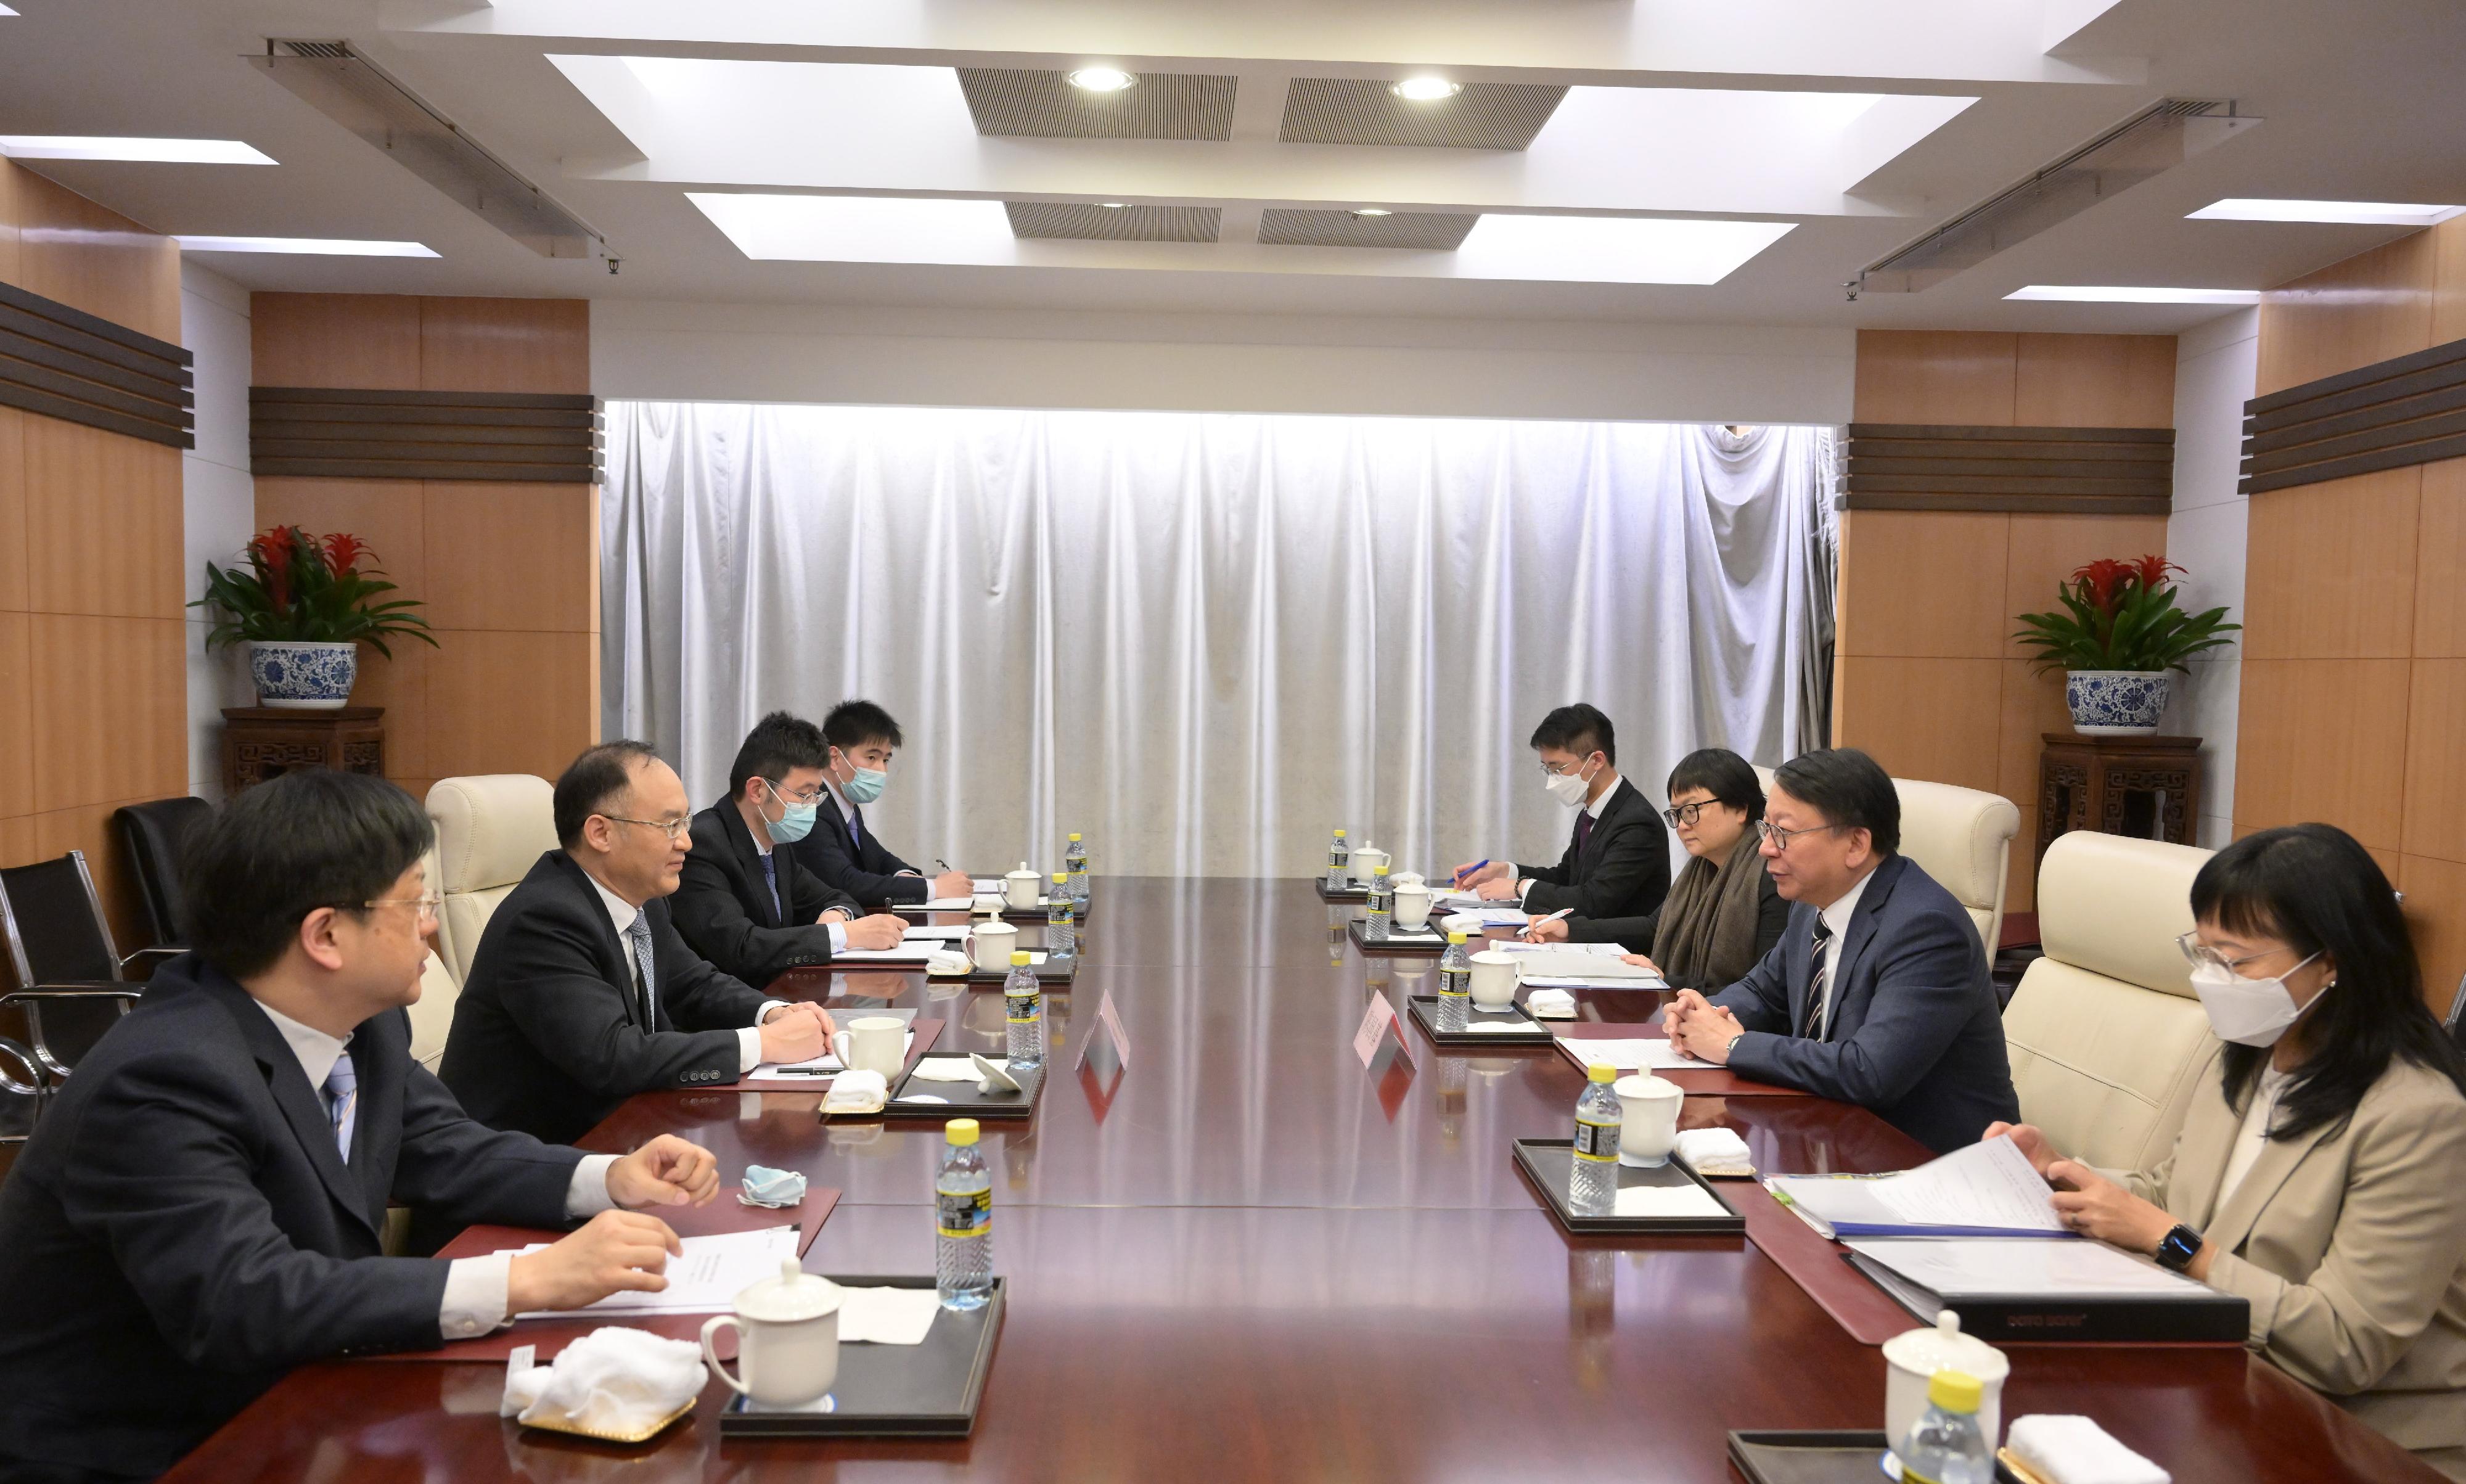 The Chief Secretary for Administration, Mr Chan Kwok-ki (second right), meets with Assistant Minister of Foreign Affairs Mr Nong Rong (second left) in Beijing today (April 27). Also attending the meeting is the Deputy Director of the Office of the Government of the Hong Kong Special Administrative Region in Beijing, Miss Amy Yuen (third right). 